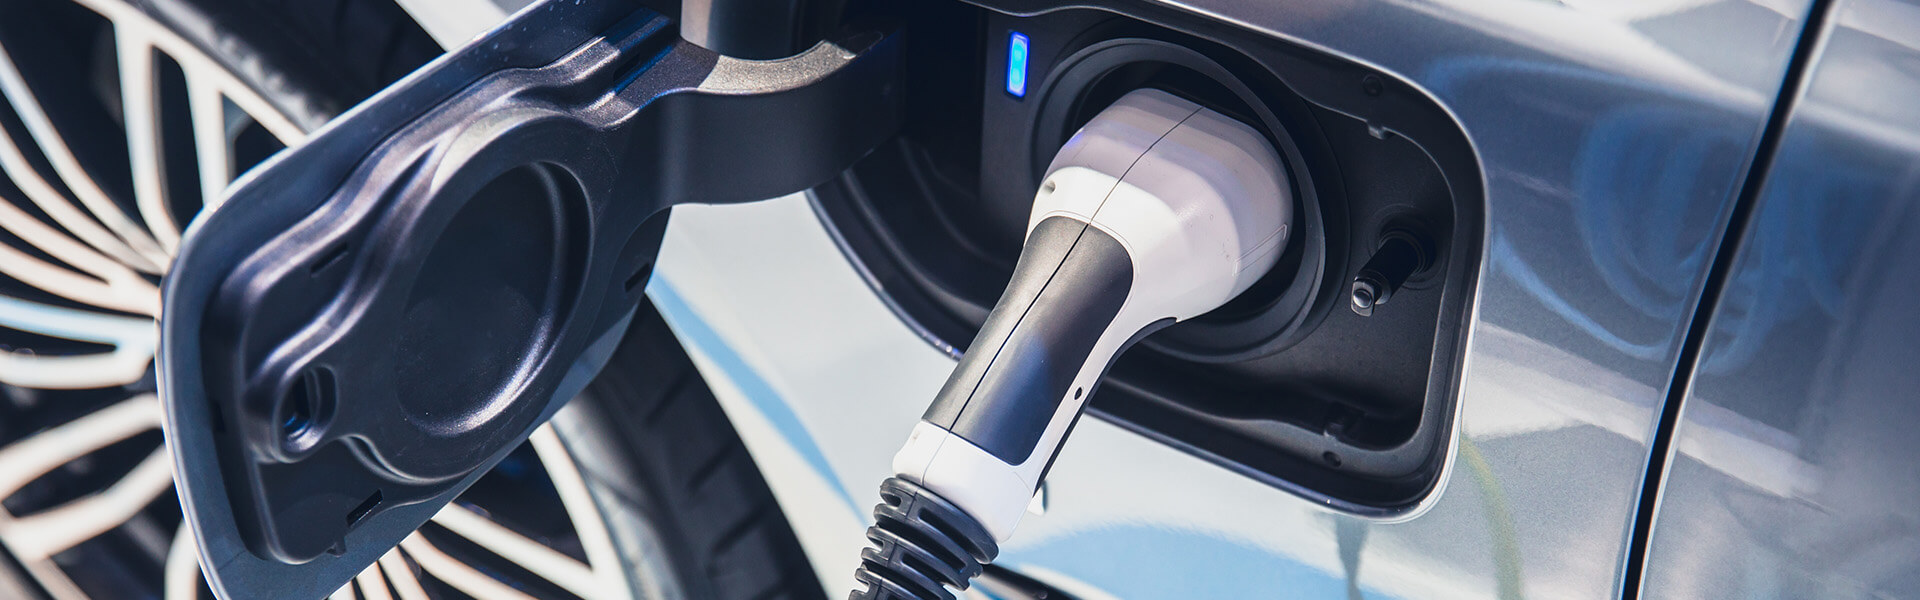 Automotive webinar - EV charging points: contractual and liability issues to be aware of